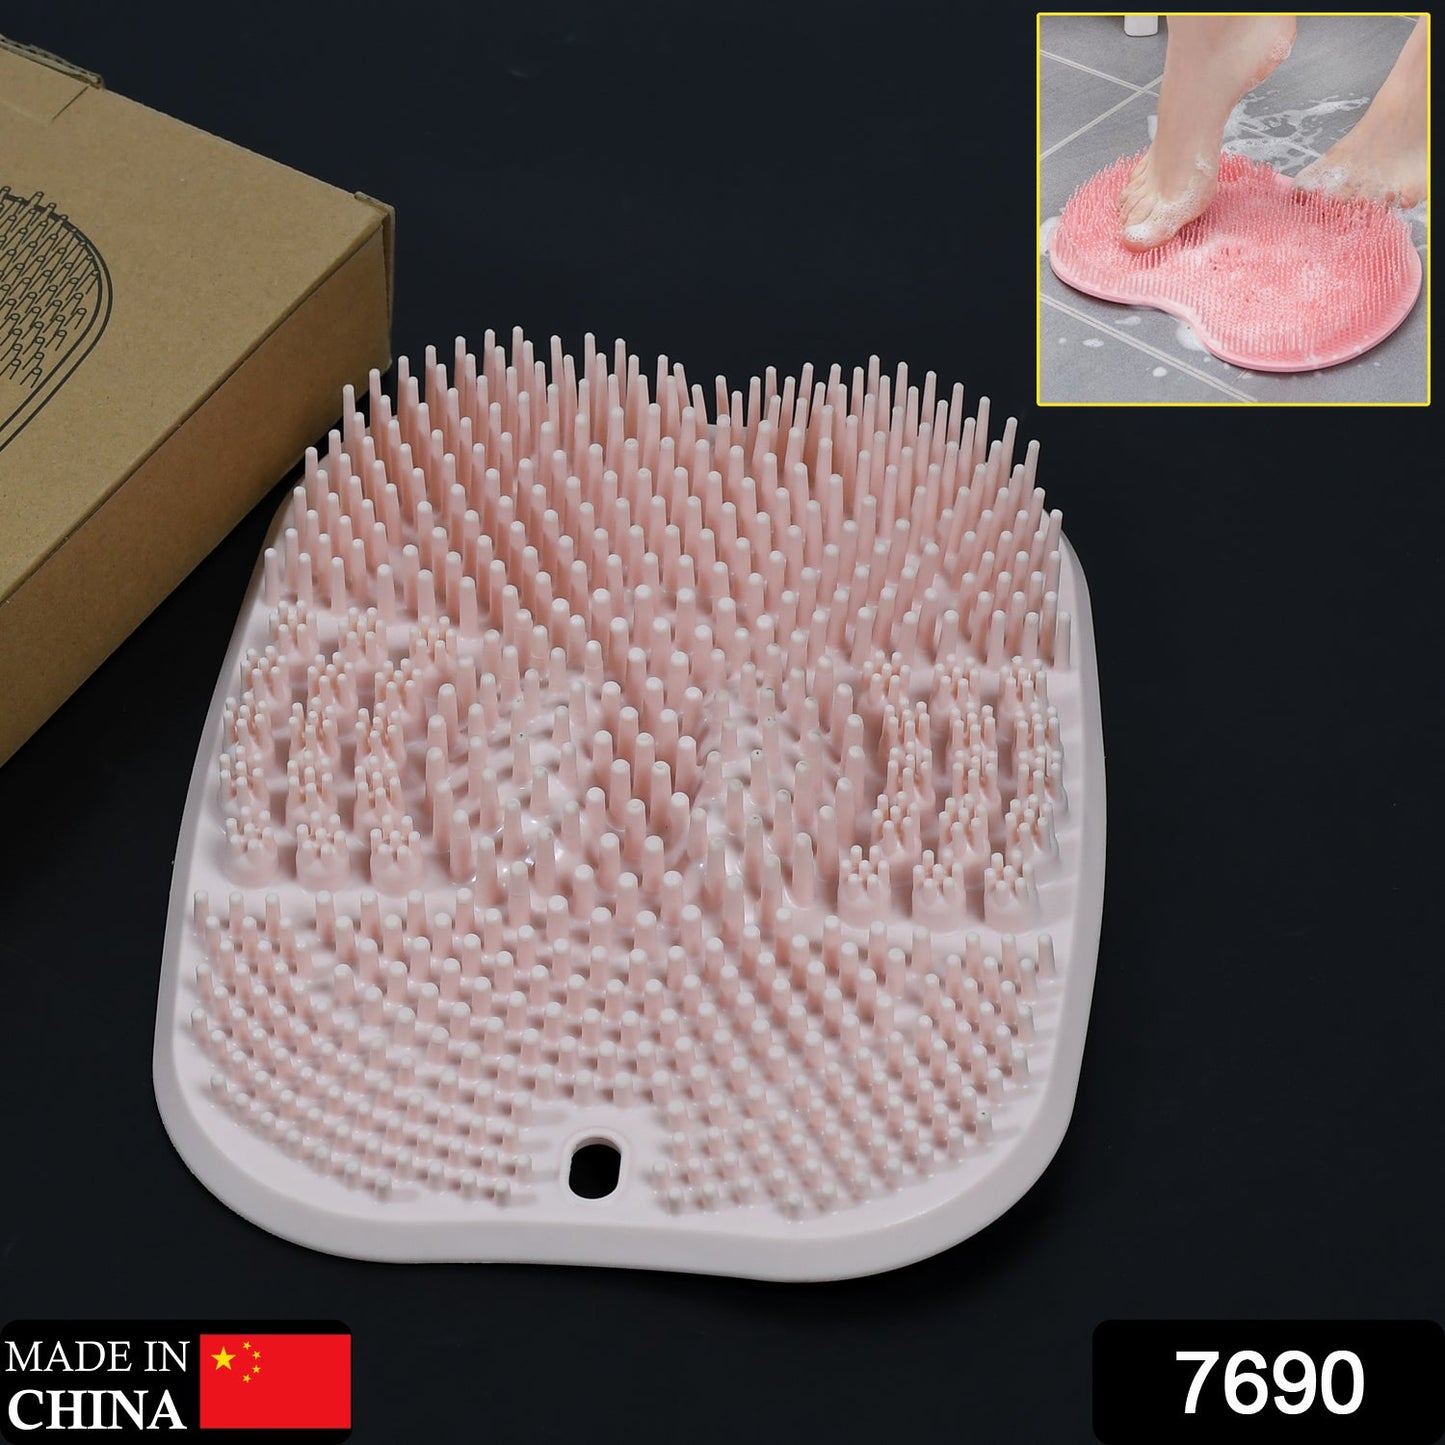 7690 Shower Foot & Back Scrubber, Massage Pad, Scrubber, Silicone Bath Massage Cushion Brush with Suction Cups, Bathroom Wash Foot Mat 